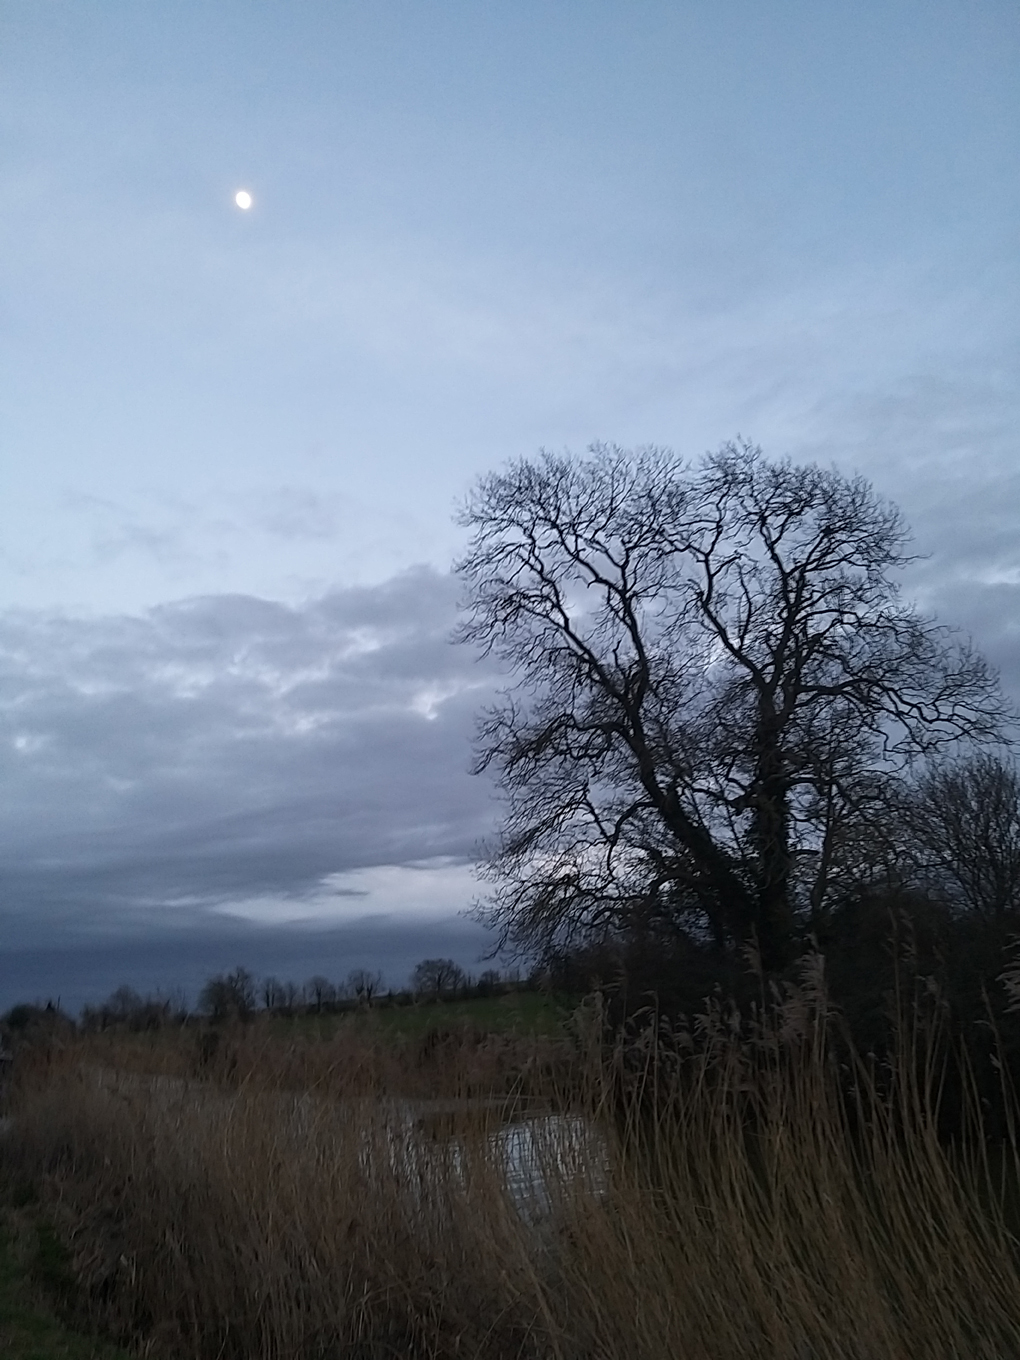 A tree without its leaves silhouetted against a twilight sky and the moon